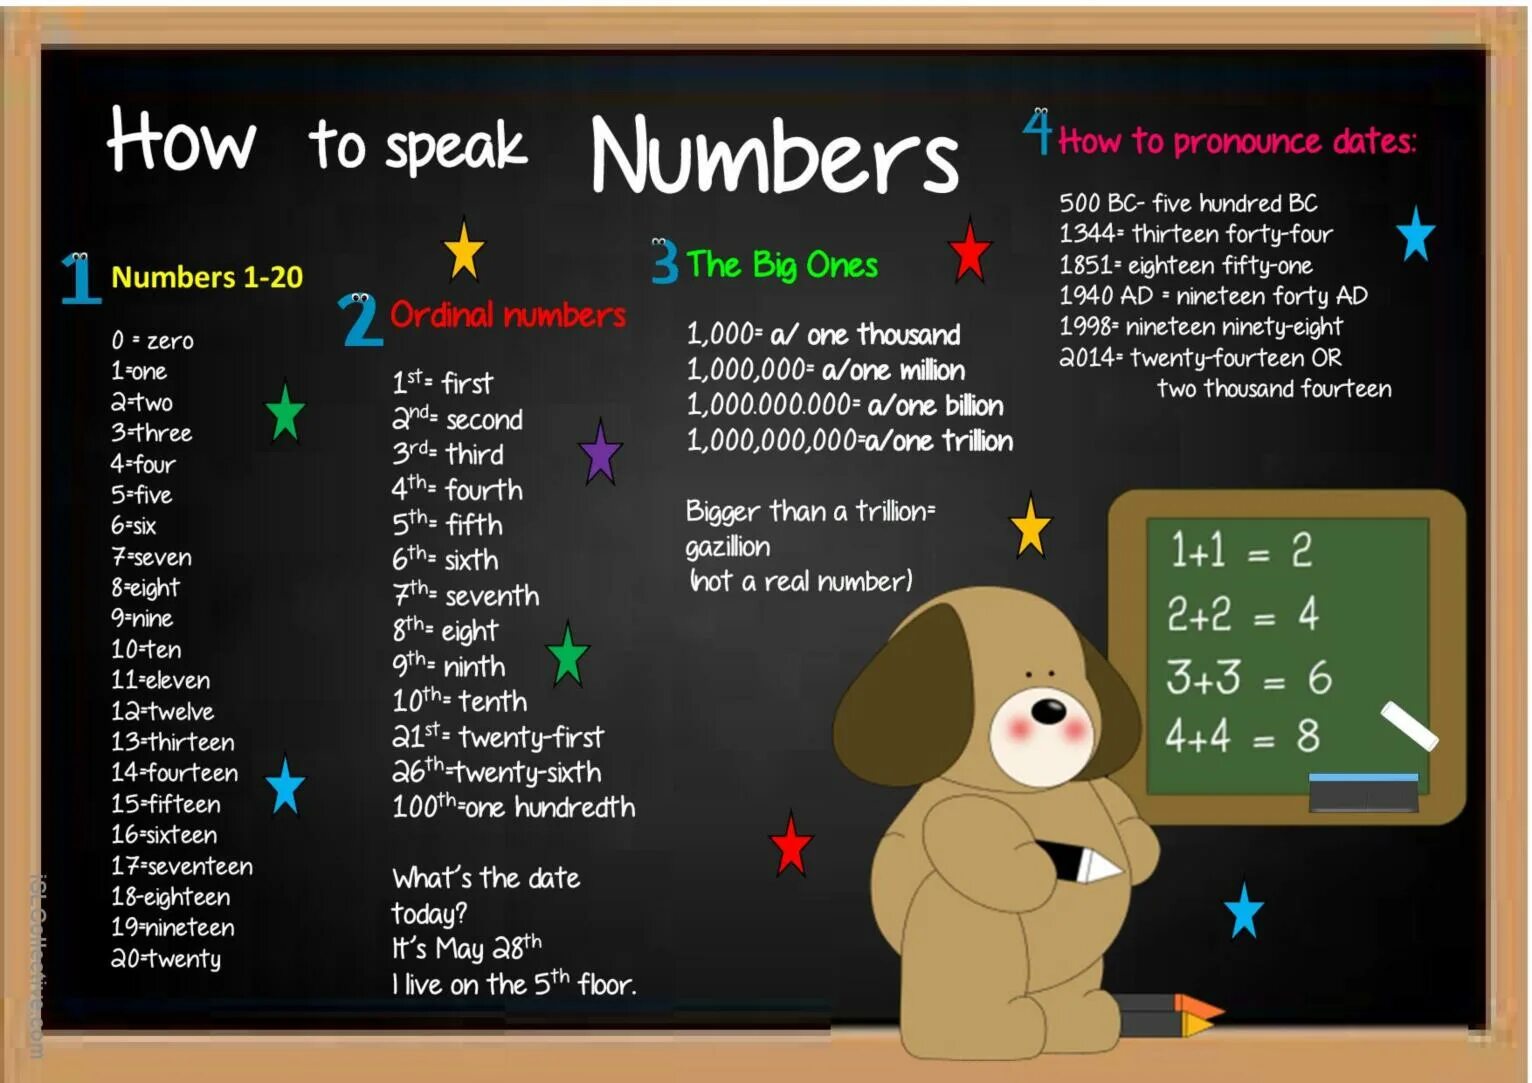 Time date numbers. Numbers and Dates. How to pronounce English numbers. How to speak numbers. Numbers and Dates in English.